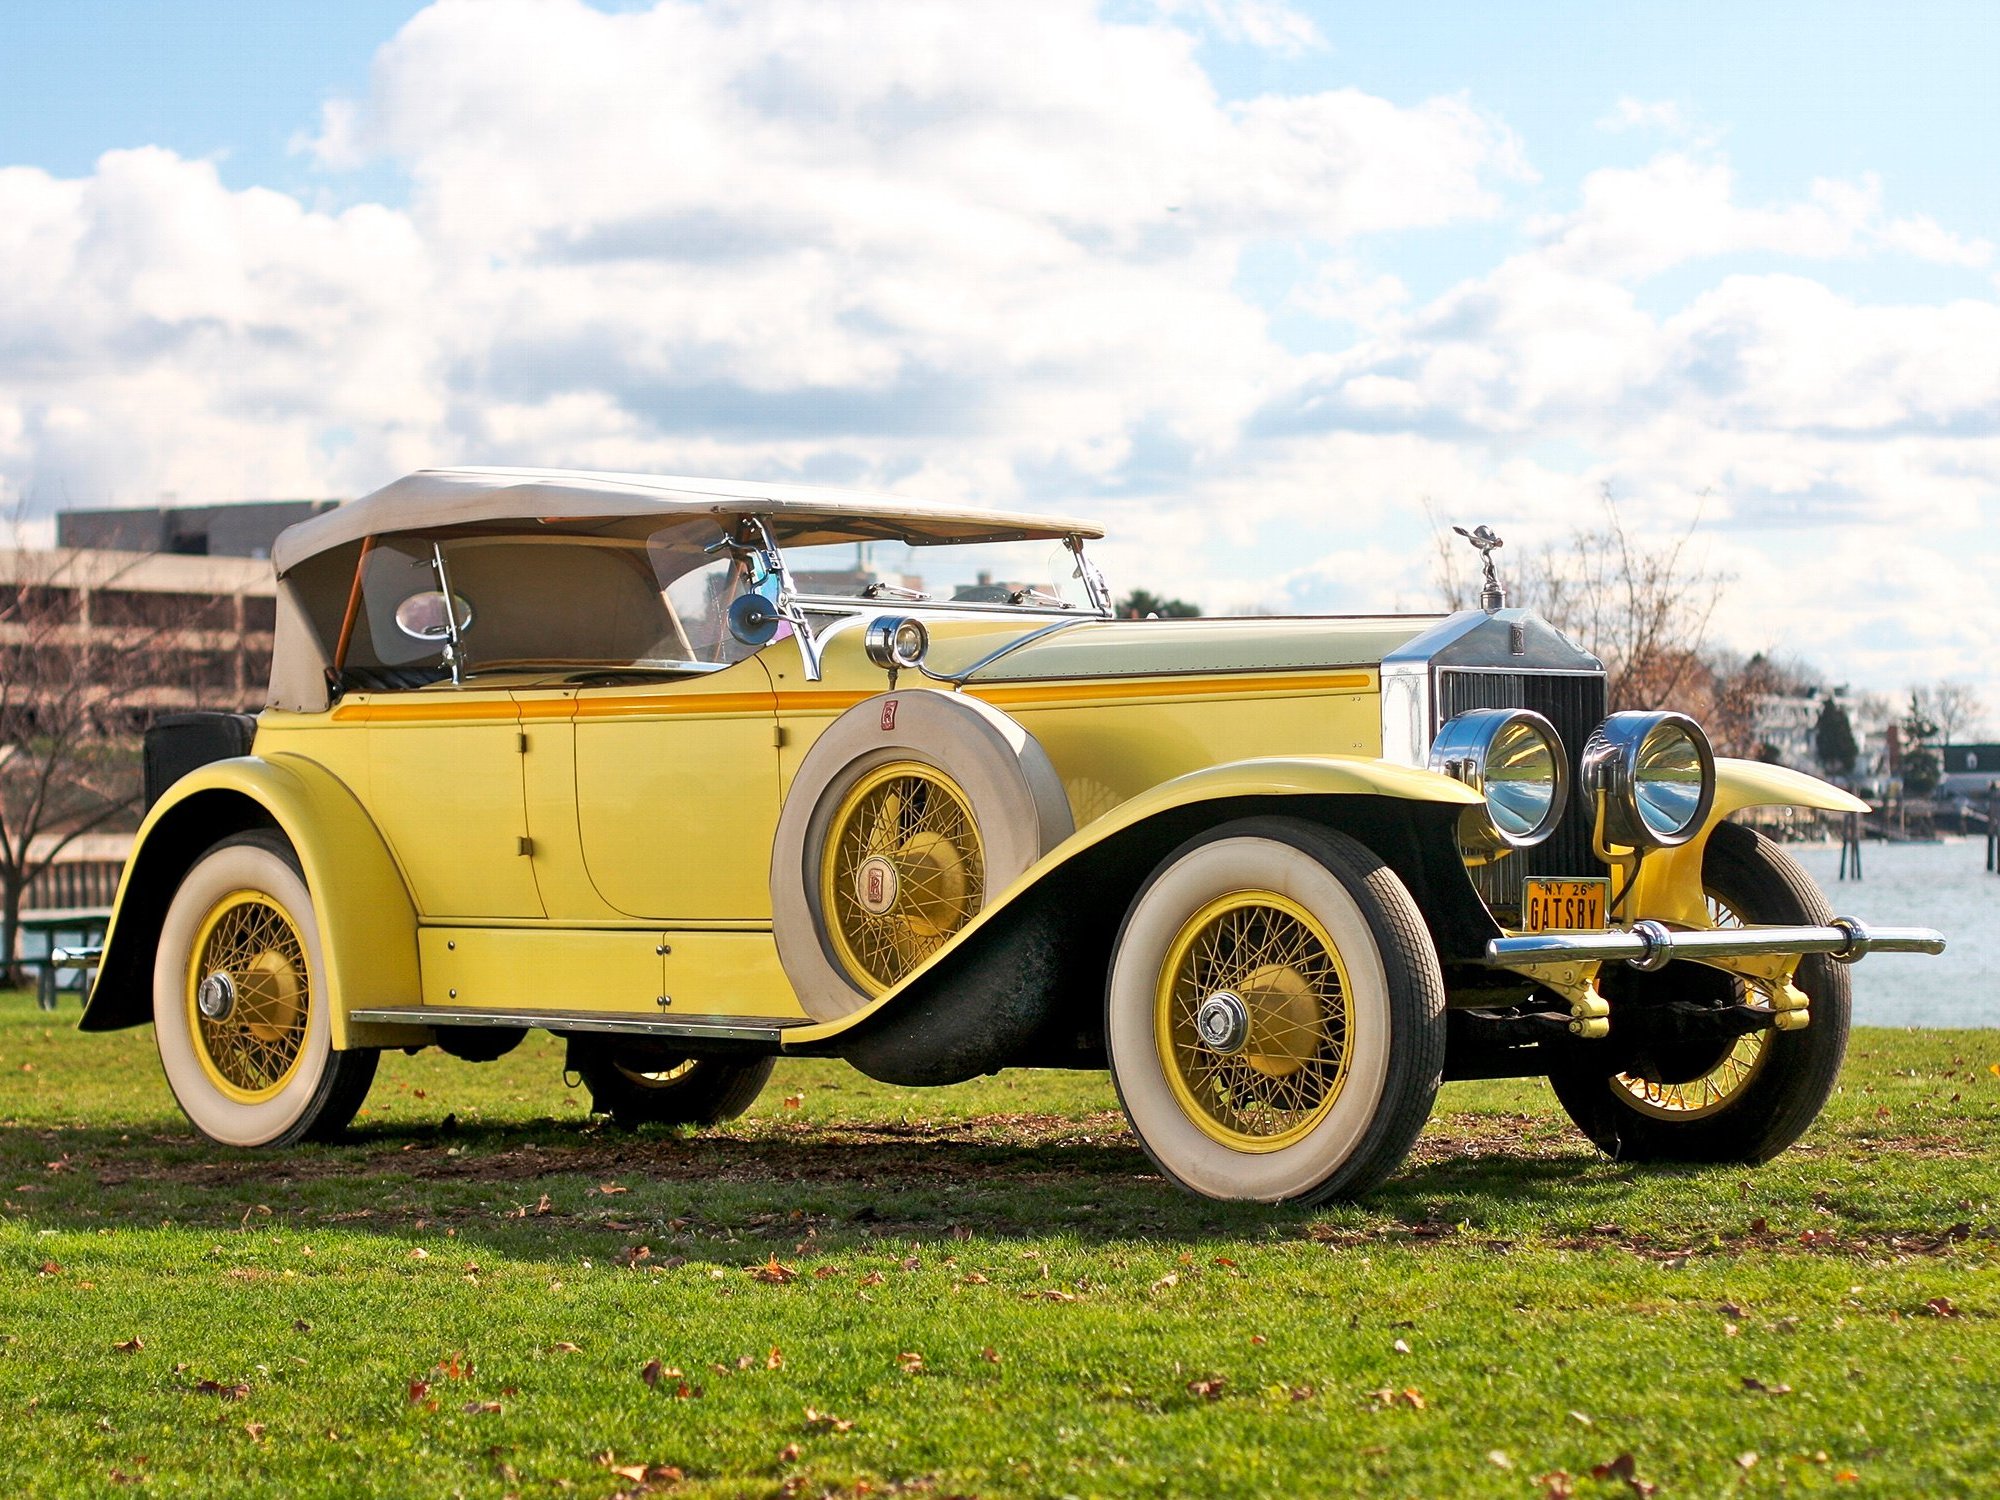 Vintage 1926 Rolls-Royce Convertible - Classic style and luxury of a Rolls-Royce automobile